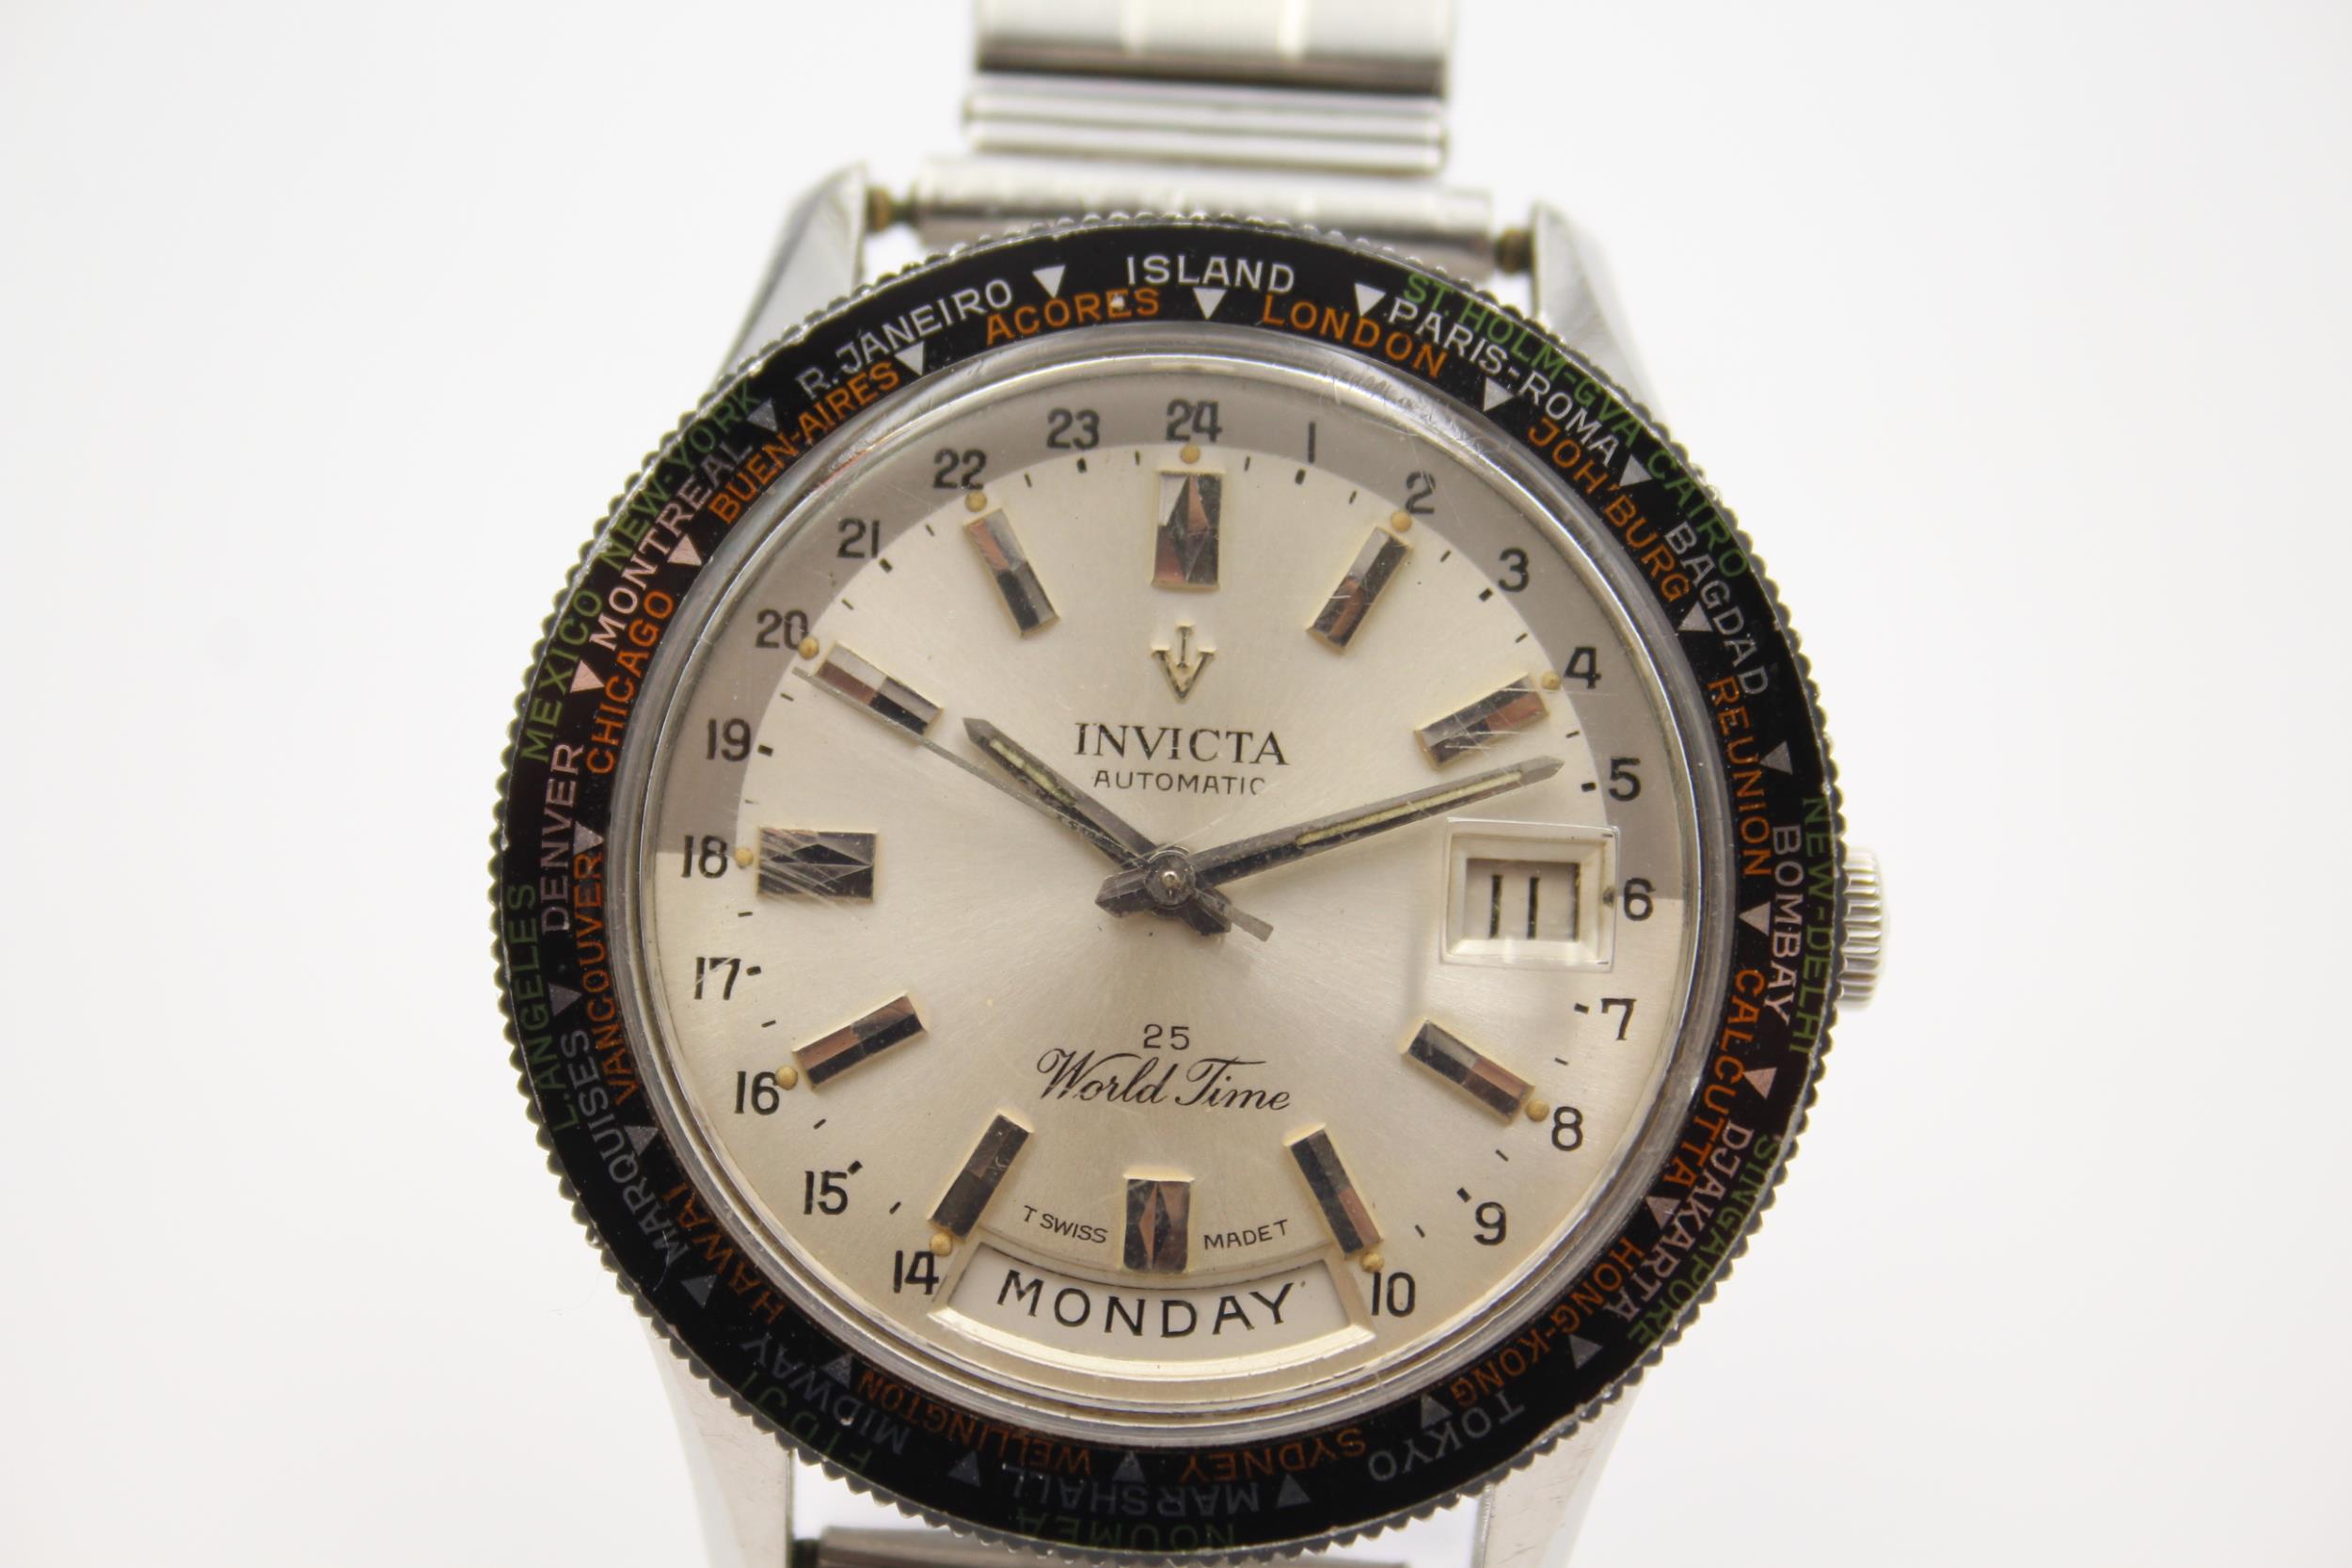 INVICTA WORLD TIME Gents Vintage WRISTWATCH Automatic WORKING - INVICTA WORLD TIME Gents Vintage - Image 2 of 5